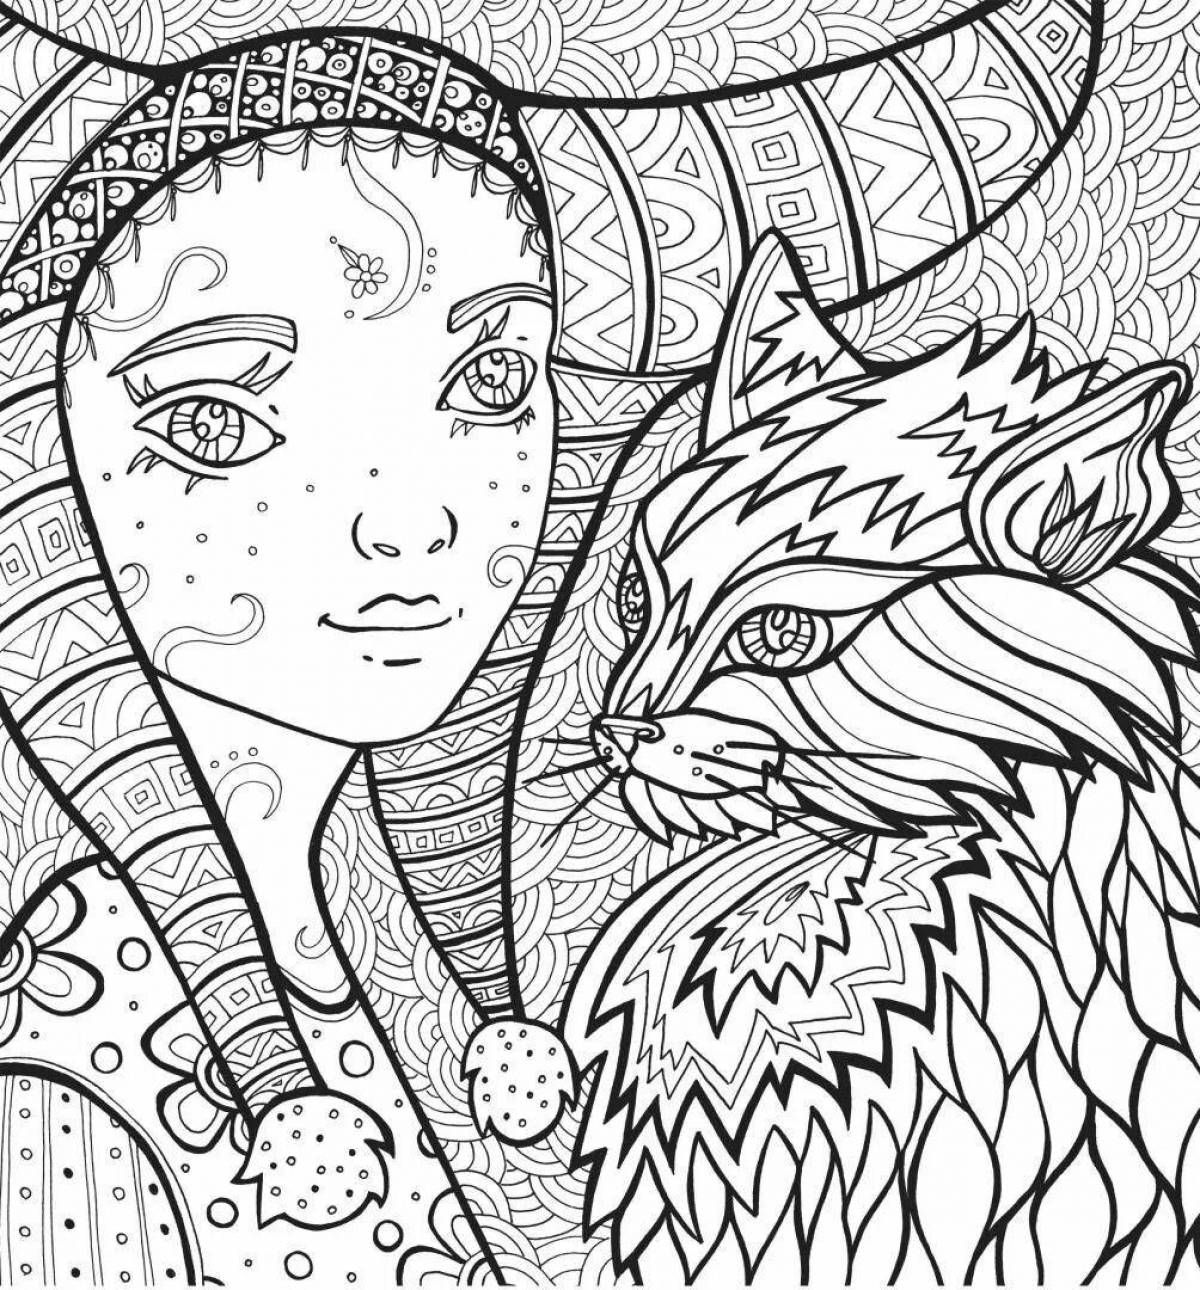 Mystical marvelous coloring book